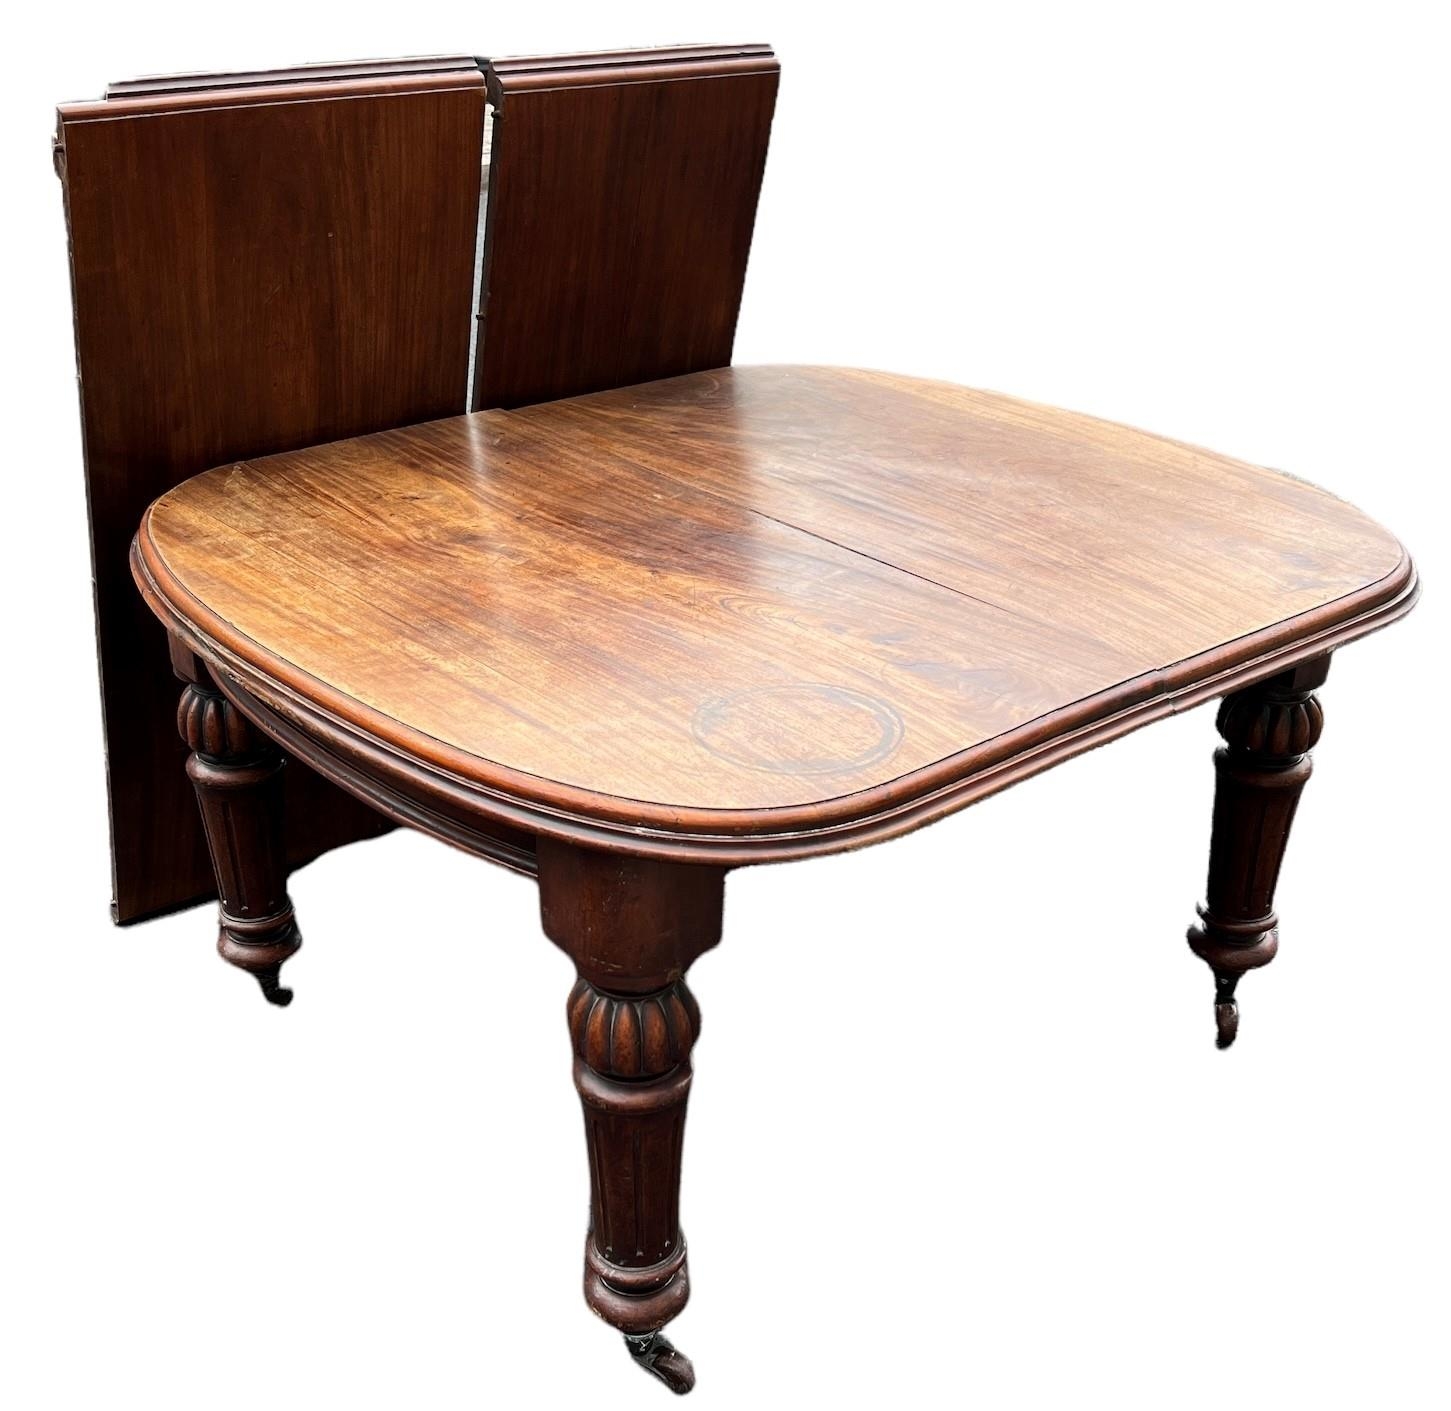 A 19TH CENTURY SOLID MAHOGANY EXTENDING DINING TABLE With two extra leaves, raised on bulbous and - Image 2 of 3